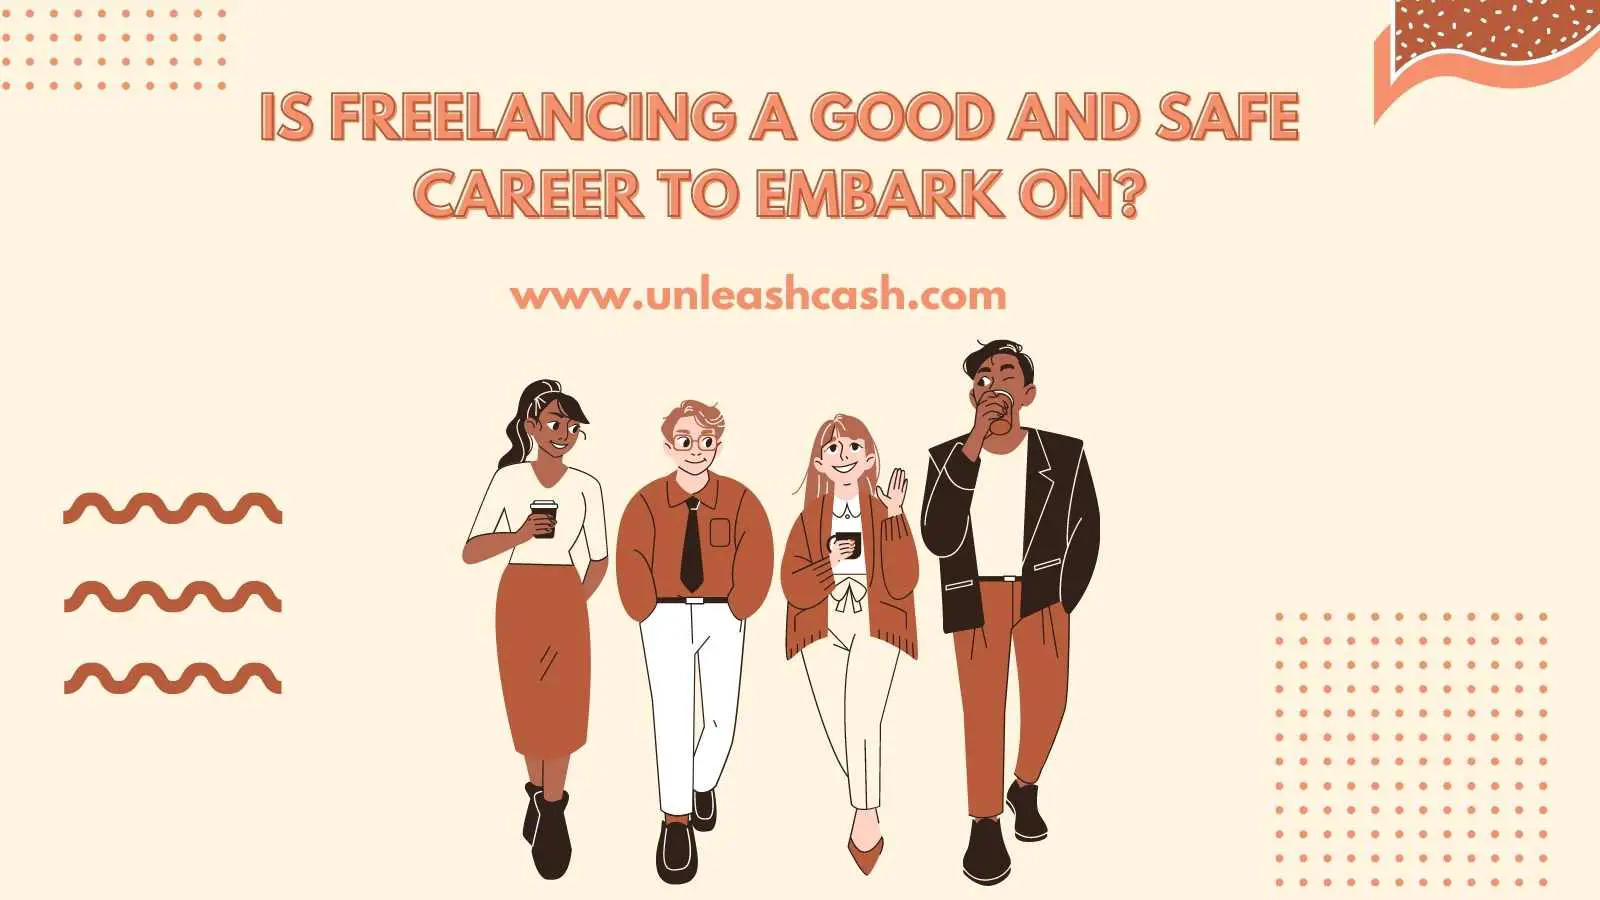 Is Freelancing A Good And Safe Career To Embark On?